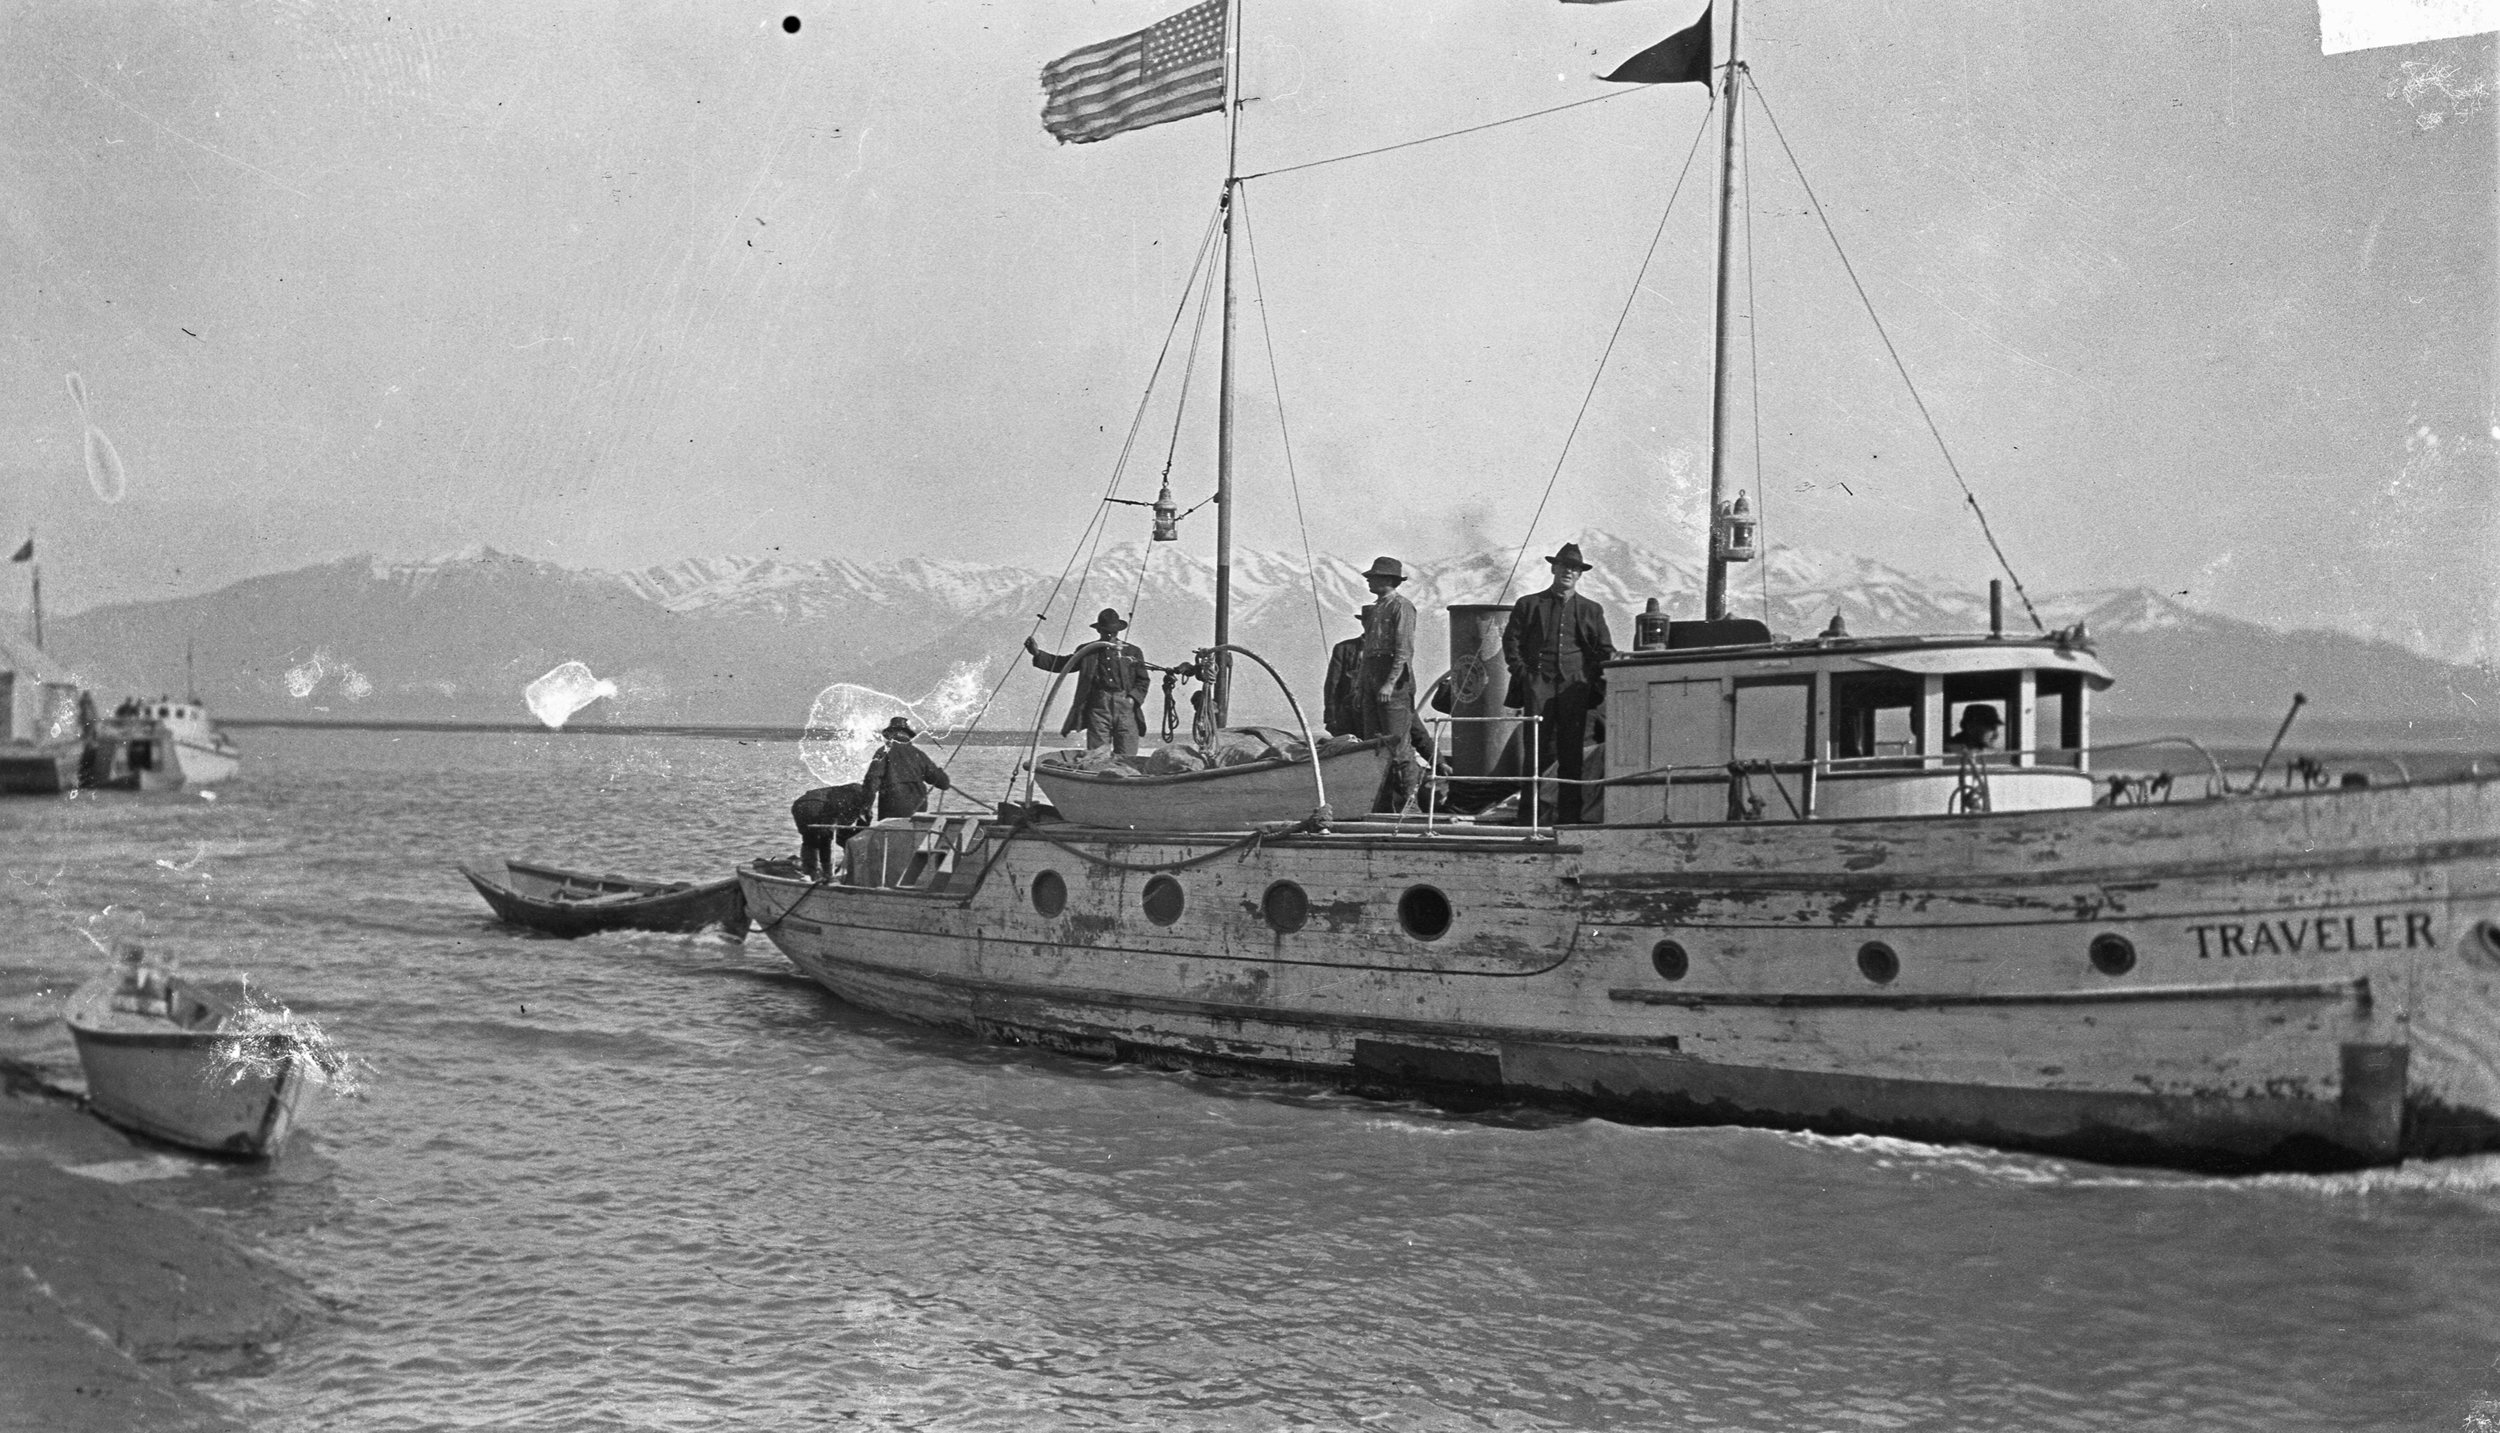 Boat Traveler coming in to Anchorage with several passengers aboard. Pyatt-Laurence Collection; Anchorage Museum, B1983.146.146